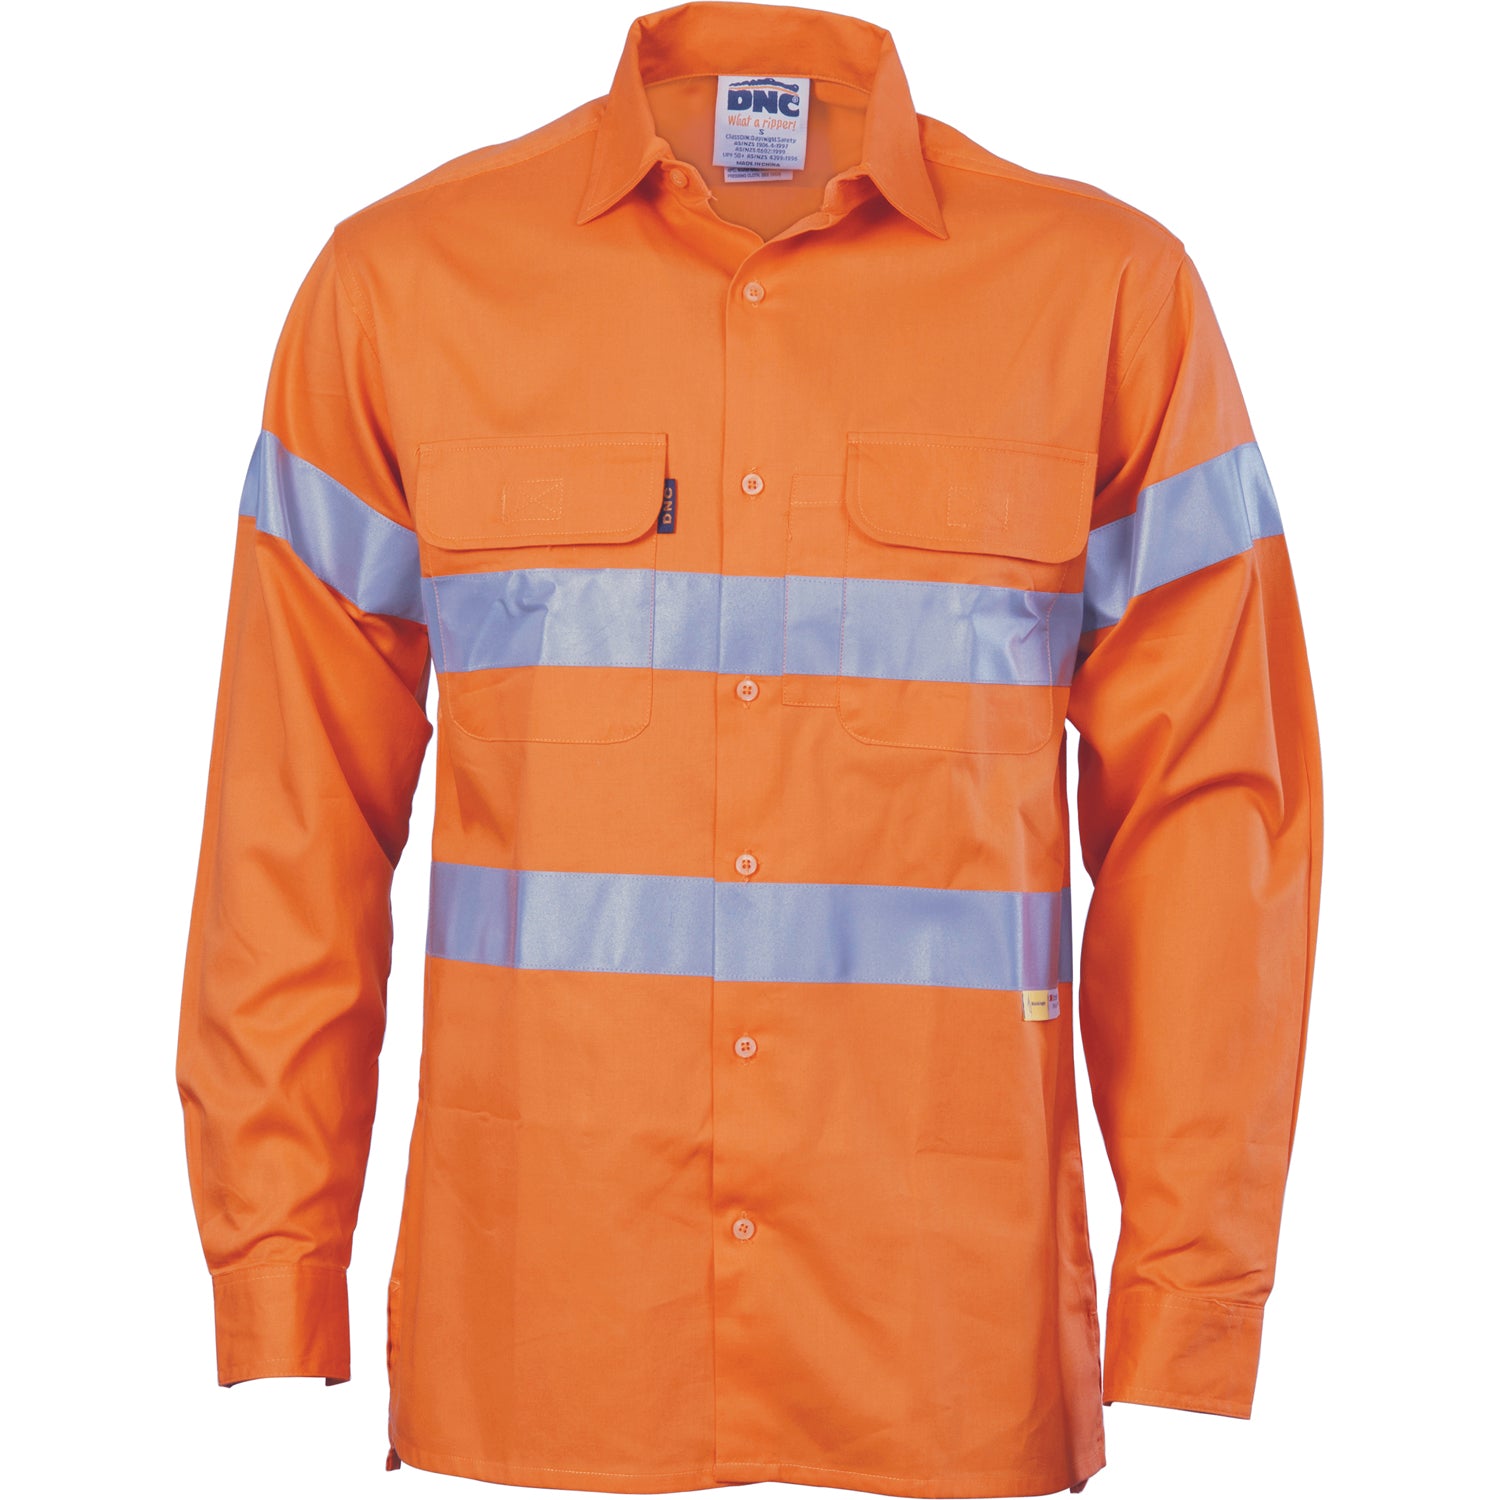 DNC HiVis Cool-Breeze Cotton Shirt with 3M 8906 R/Tape - Long sleeve -(3987)